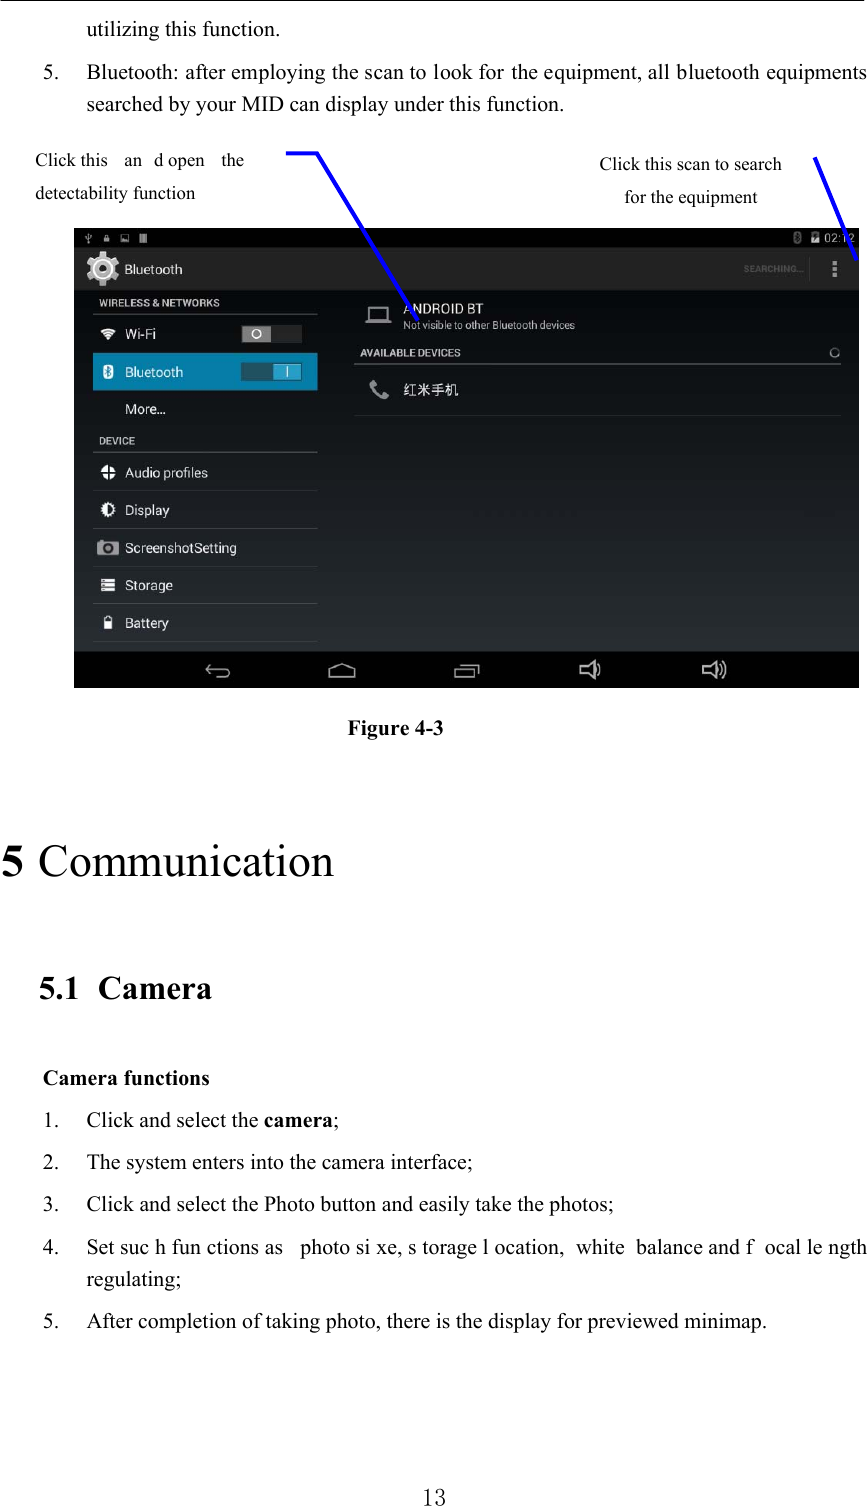          13 utilizing this function.   5. Bluetooth: after employing the scan to look for the equipment, all bluetooth equipments searched by your MID can display under this function.           Figure 4-3   5 Communication  5.1 Camera  Camera functions   1. Click and select the camera;  2. The system enters into the camera interface;   3. Click and select the Photo button and easily take the photos;   4. Set suc h fun ctions as  photo si xe, s torage l ocation, white balance and f ocal le ngth regulating;  5. After completion of taking photo, there is the display for previewed minimap.    Click this scan to search for the equipment Click this  an d open  the  detectability function   